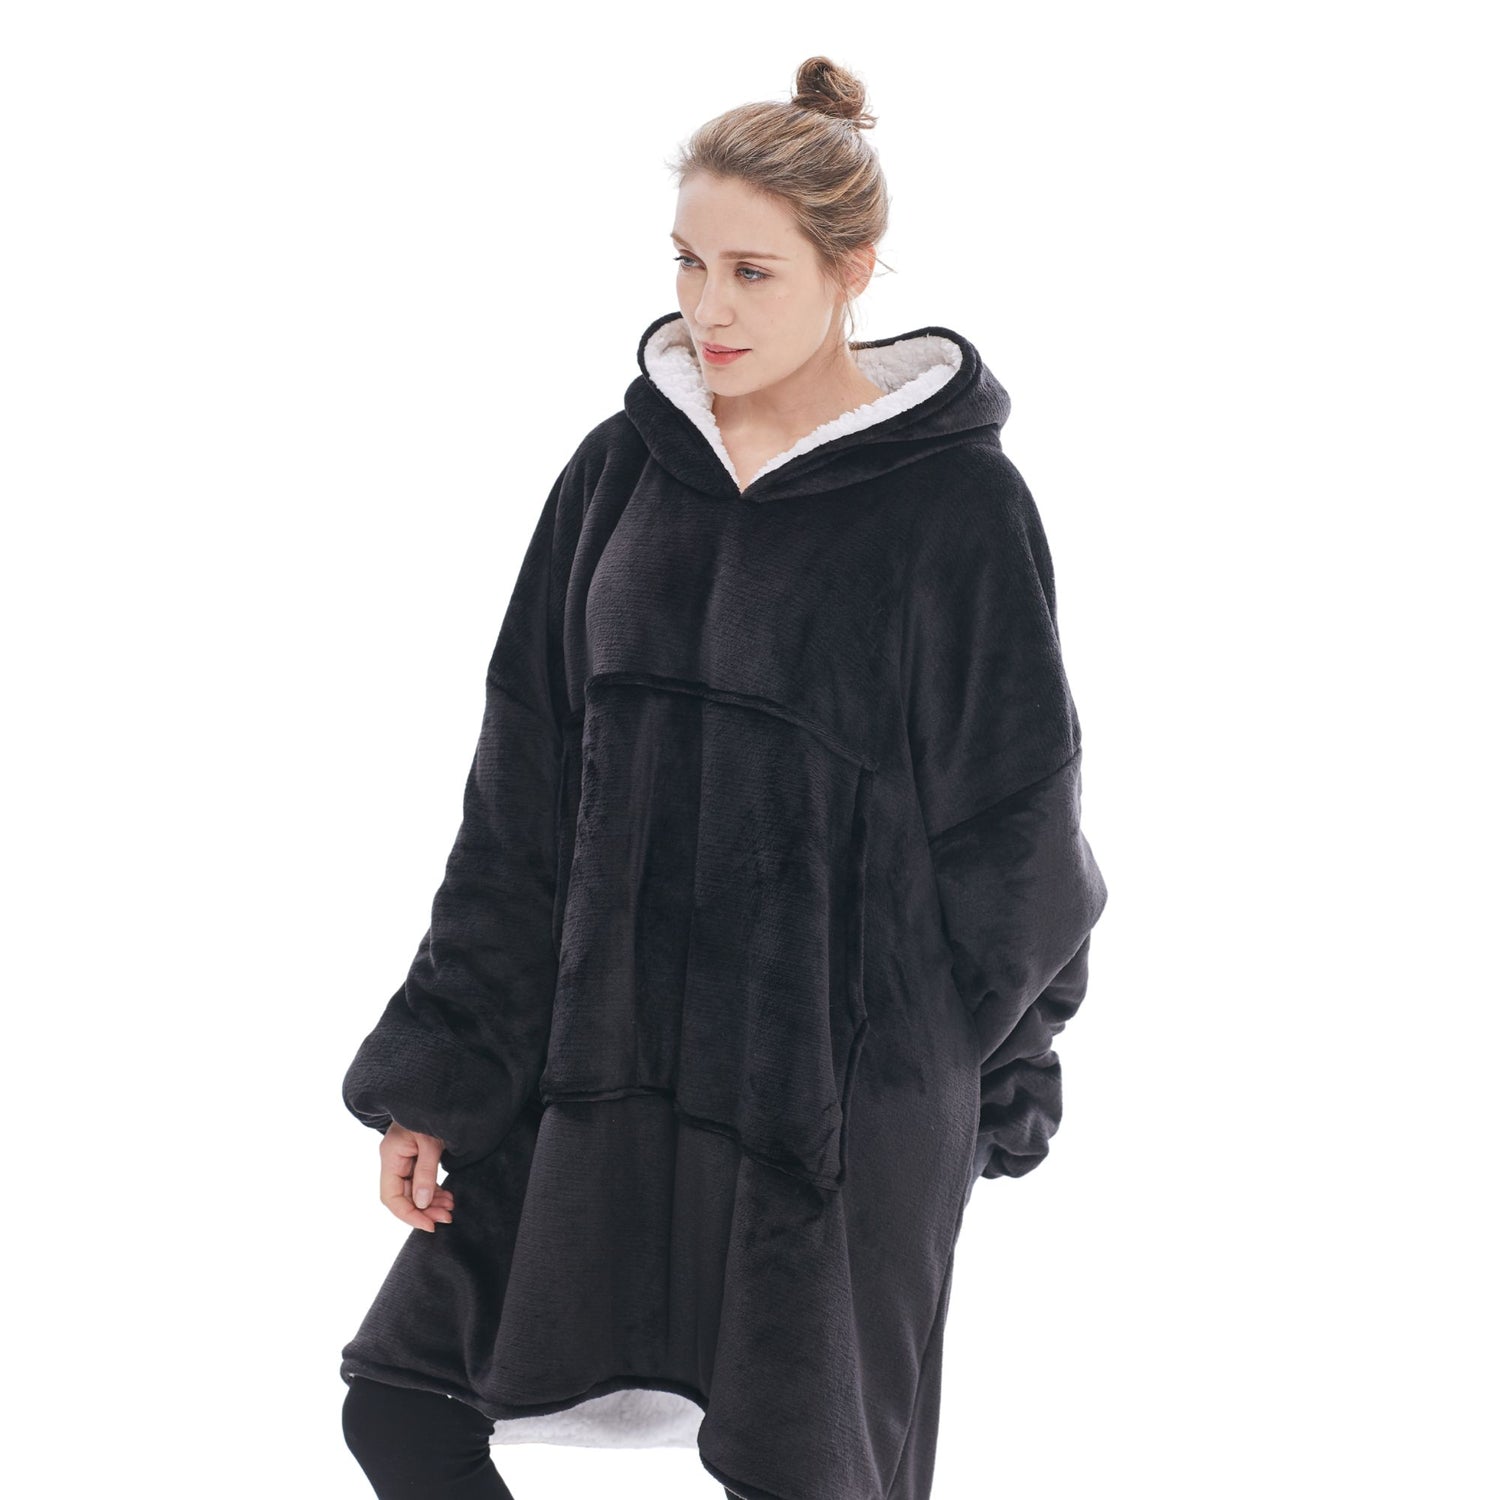 Pull Plaid Femme Sweat Polaire Géant Oversized Hoodie® sweet hiver anti froid noir